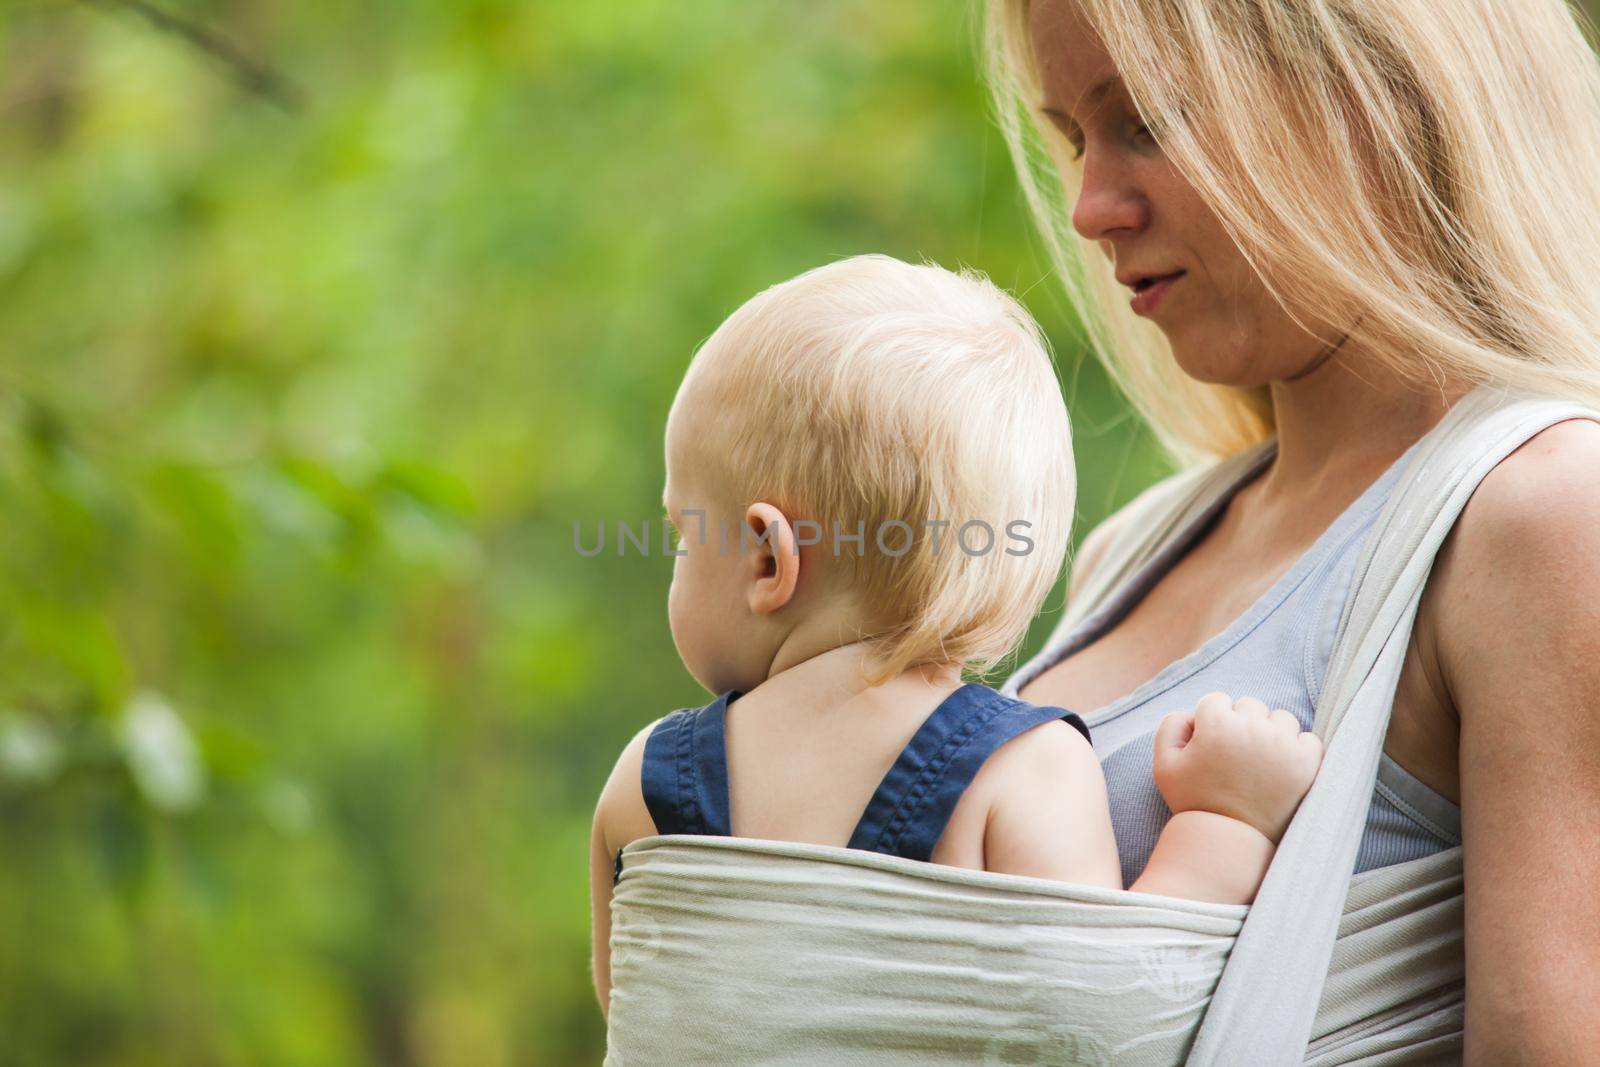 Mother is carrying her child and walking. Baby in sling outdoor.